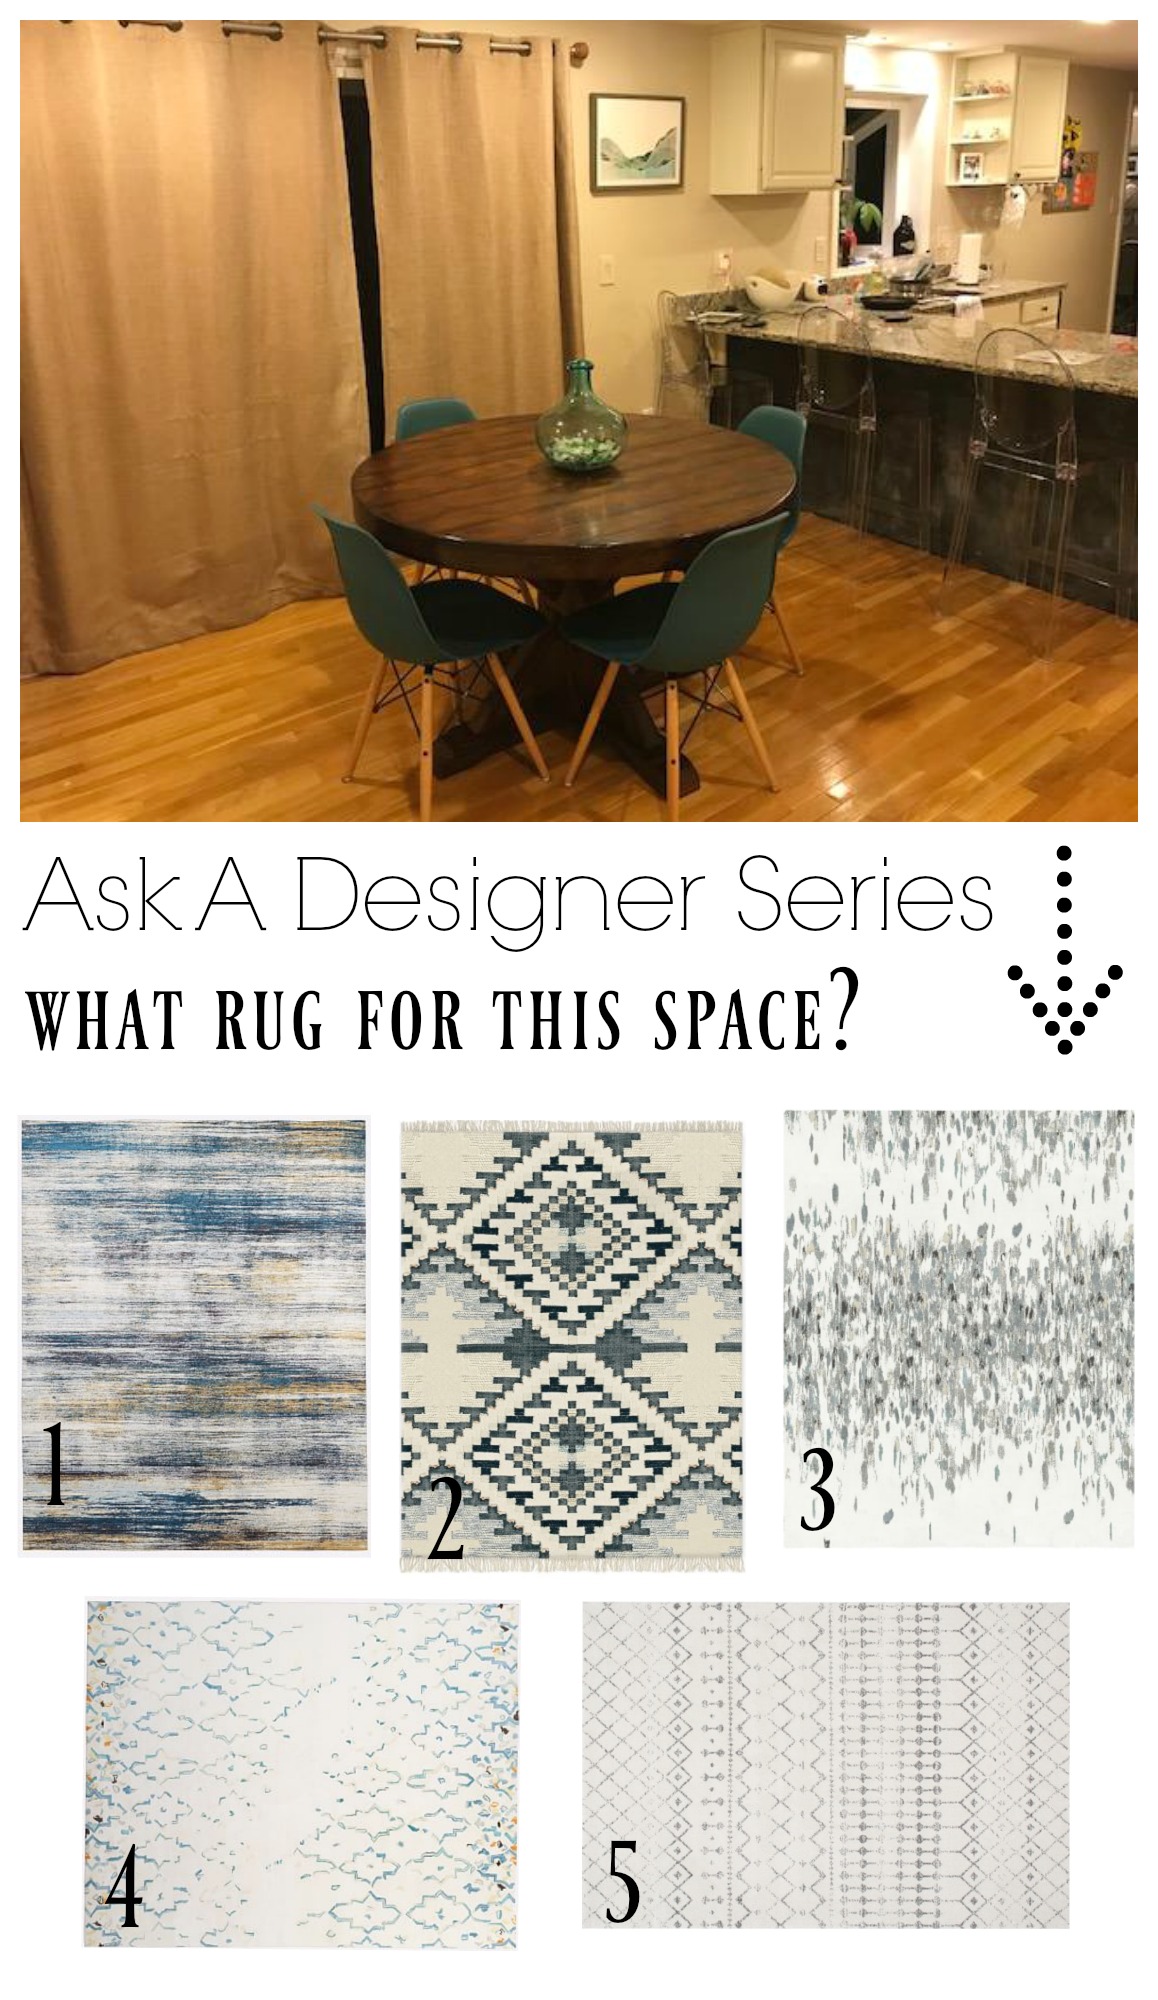 Ask a Designer Series- What rug for this space?